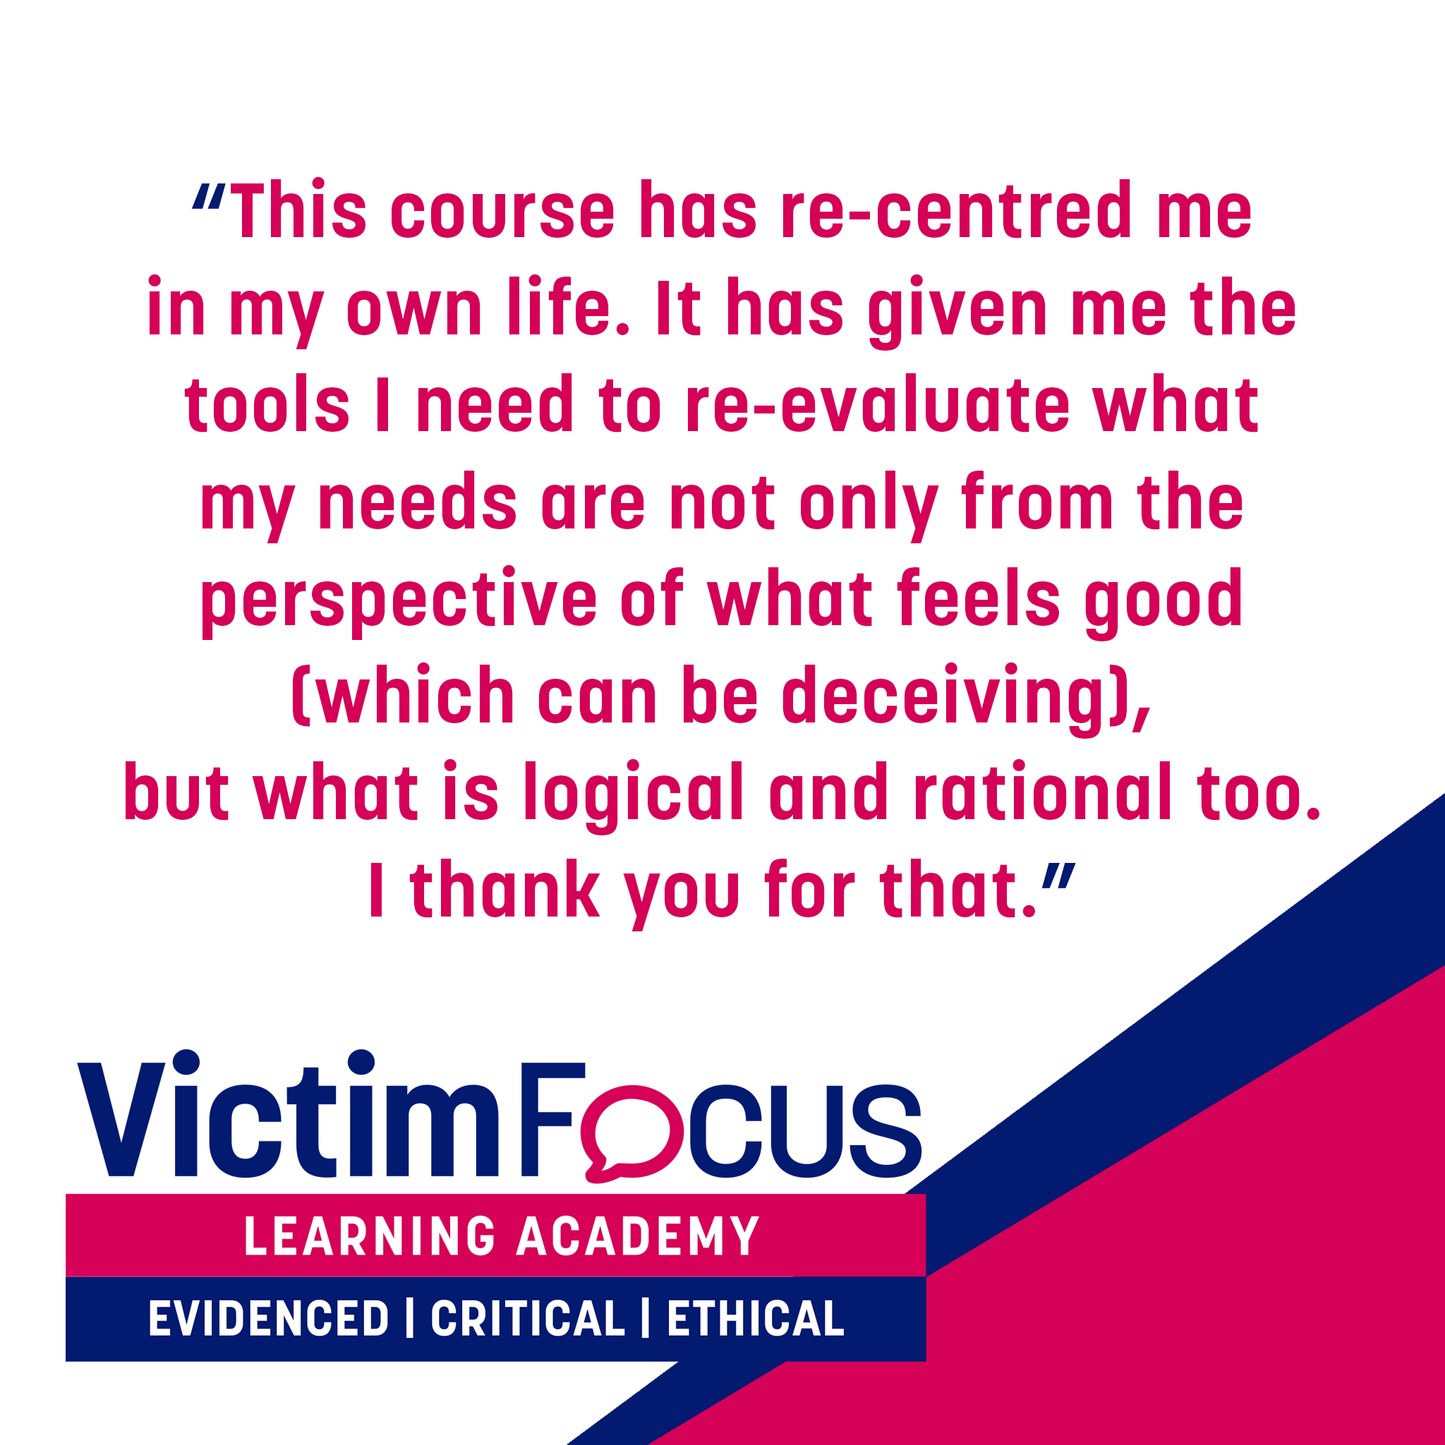 VictimFocus Academy Unlimited Access to All Courses For One Year £349.00